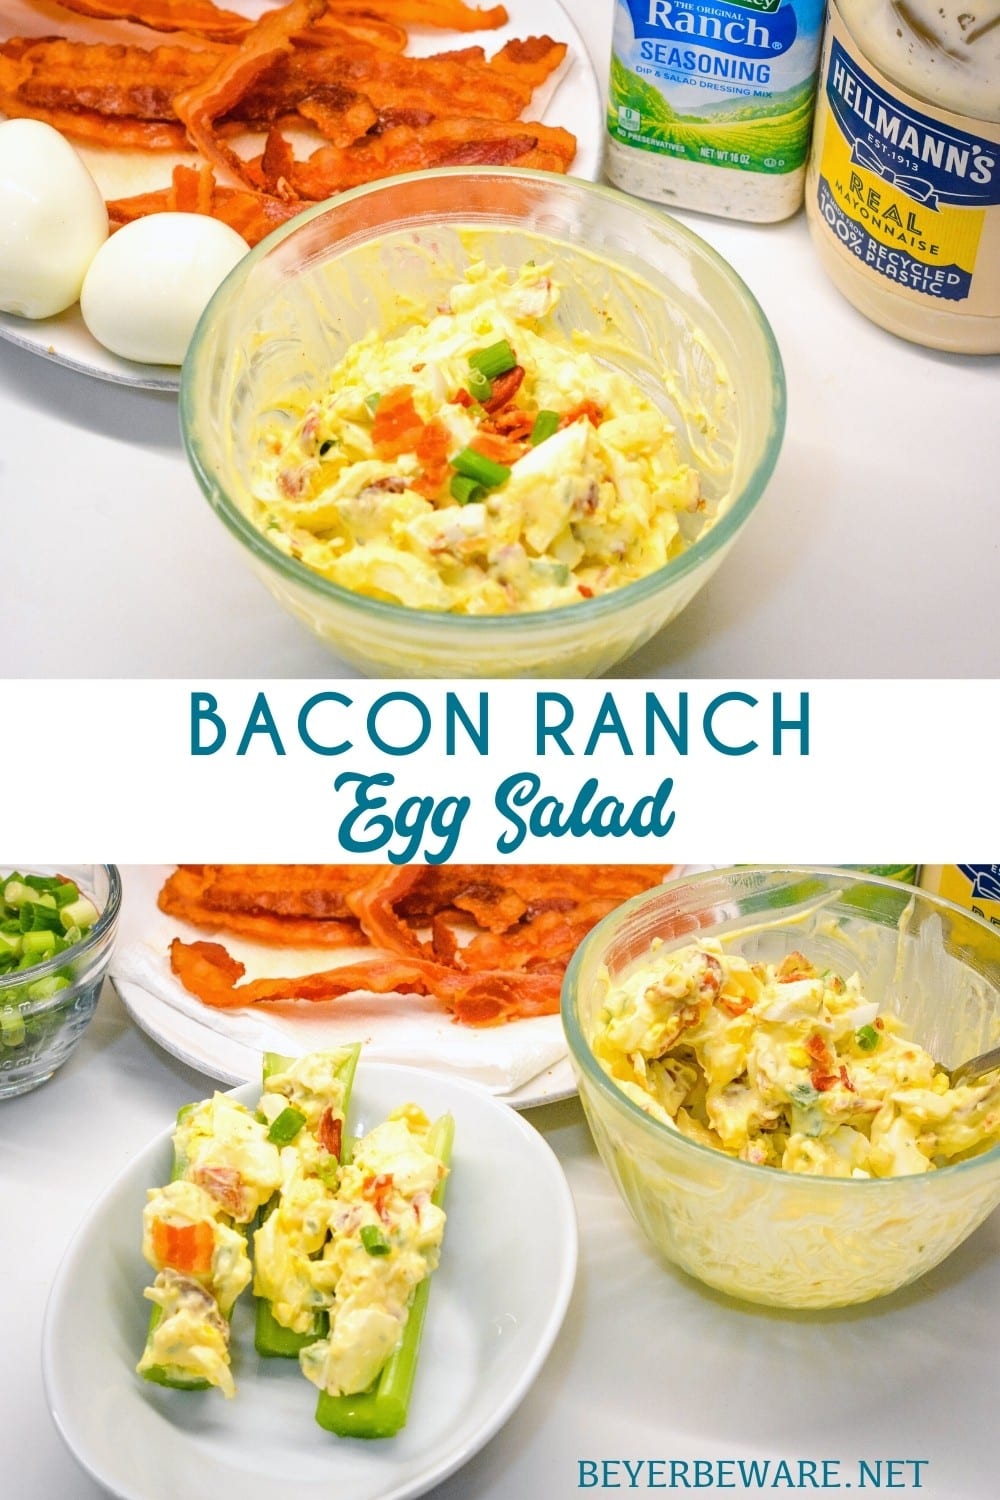 Bacon Ranch Egg Salad is a low-carb and keto egg salad recipe made with base ingredients of hard-boiled eggs, bacon, mayonnaise, and ranch seasoning and can be doctored up with the addition of items like green onions, cheese, and avocados.